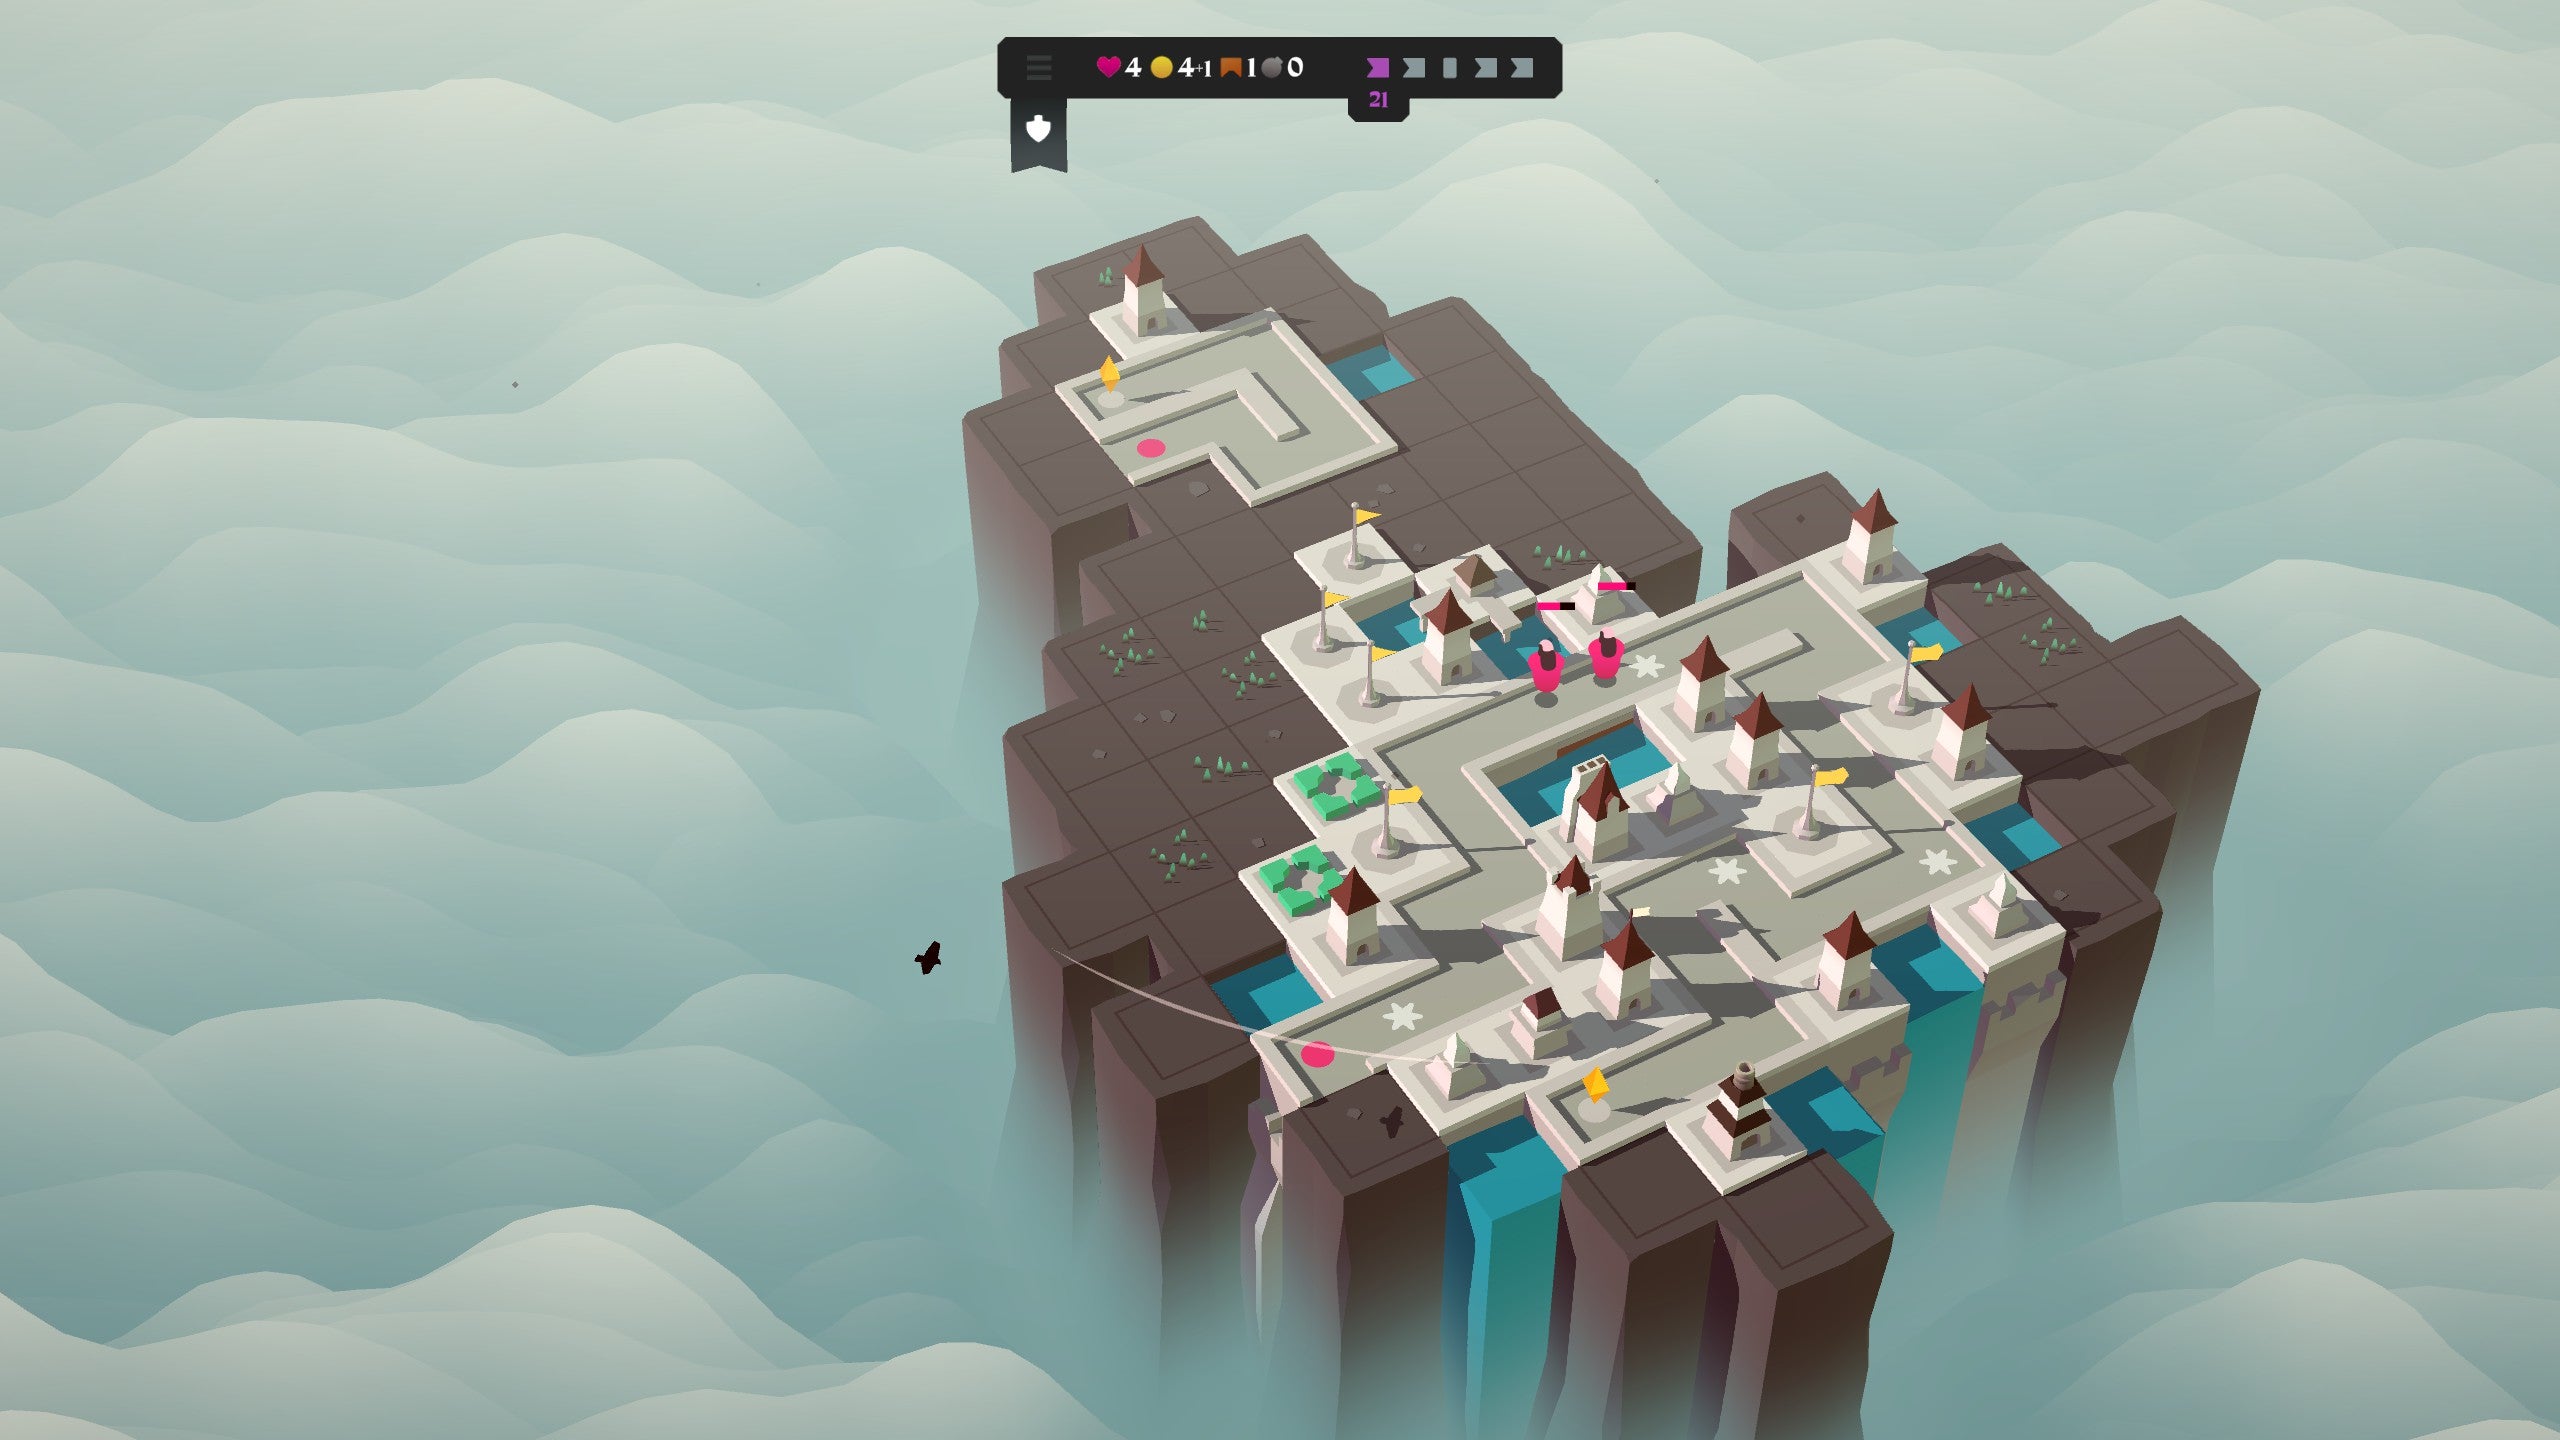 A cityscape in the sky, on a small island that can be expanded. It's a tower-defence game but very stripped back visually. It looks like a mini Greek city in the sky.